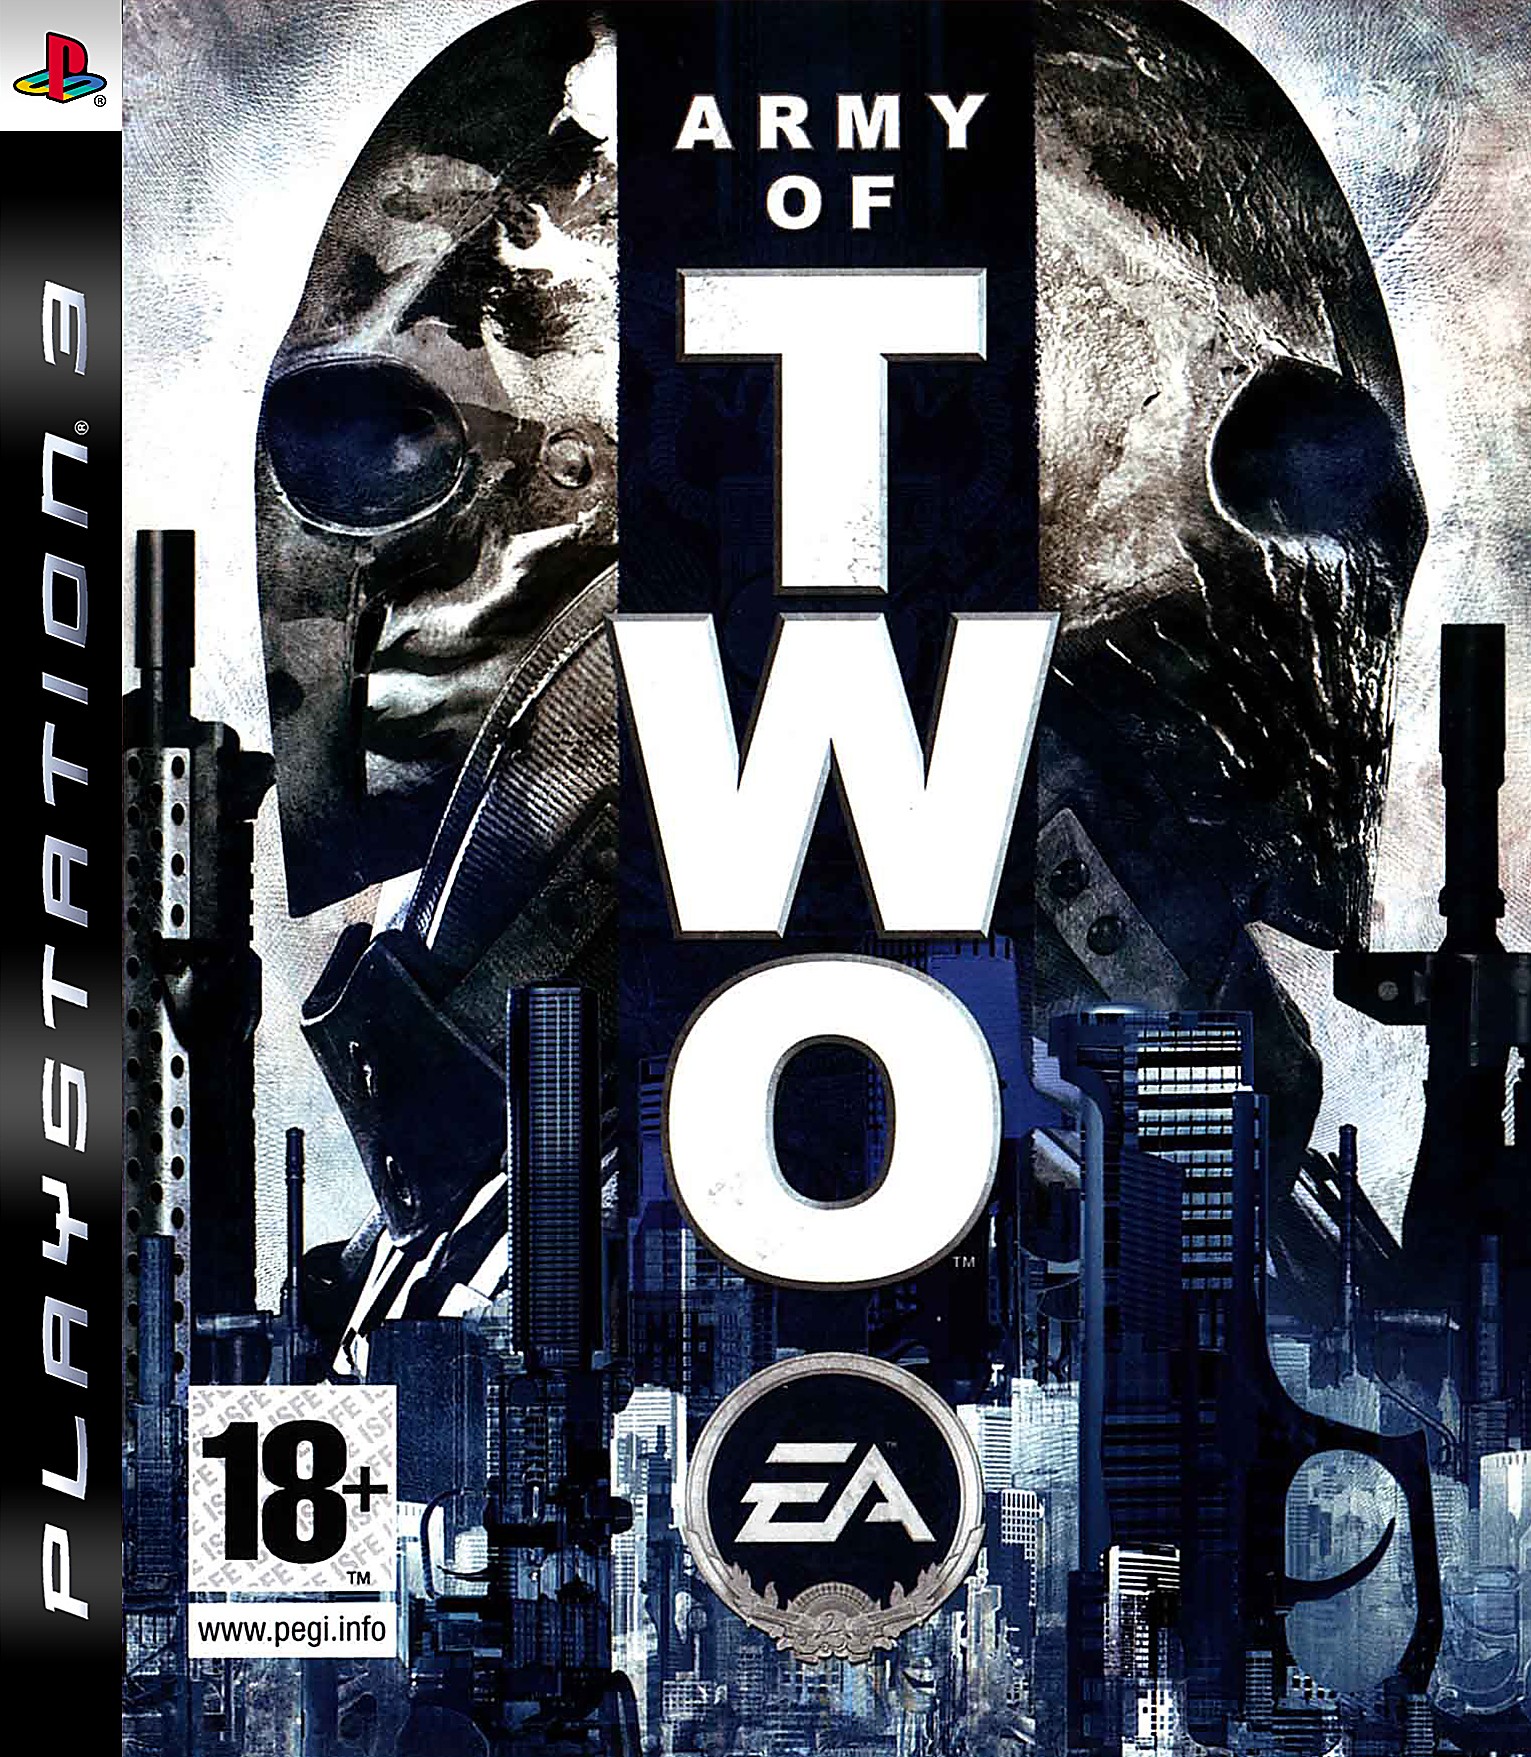 'Army of Two'